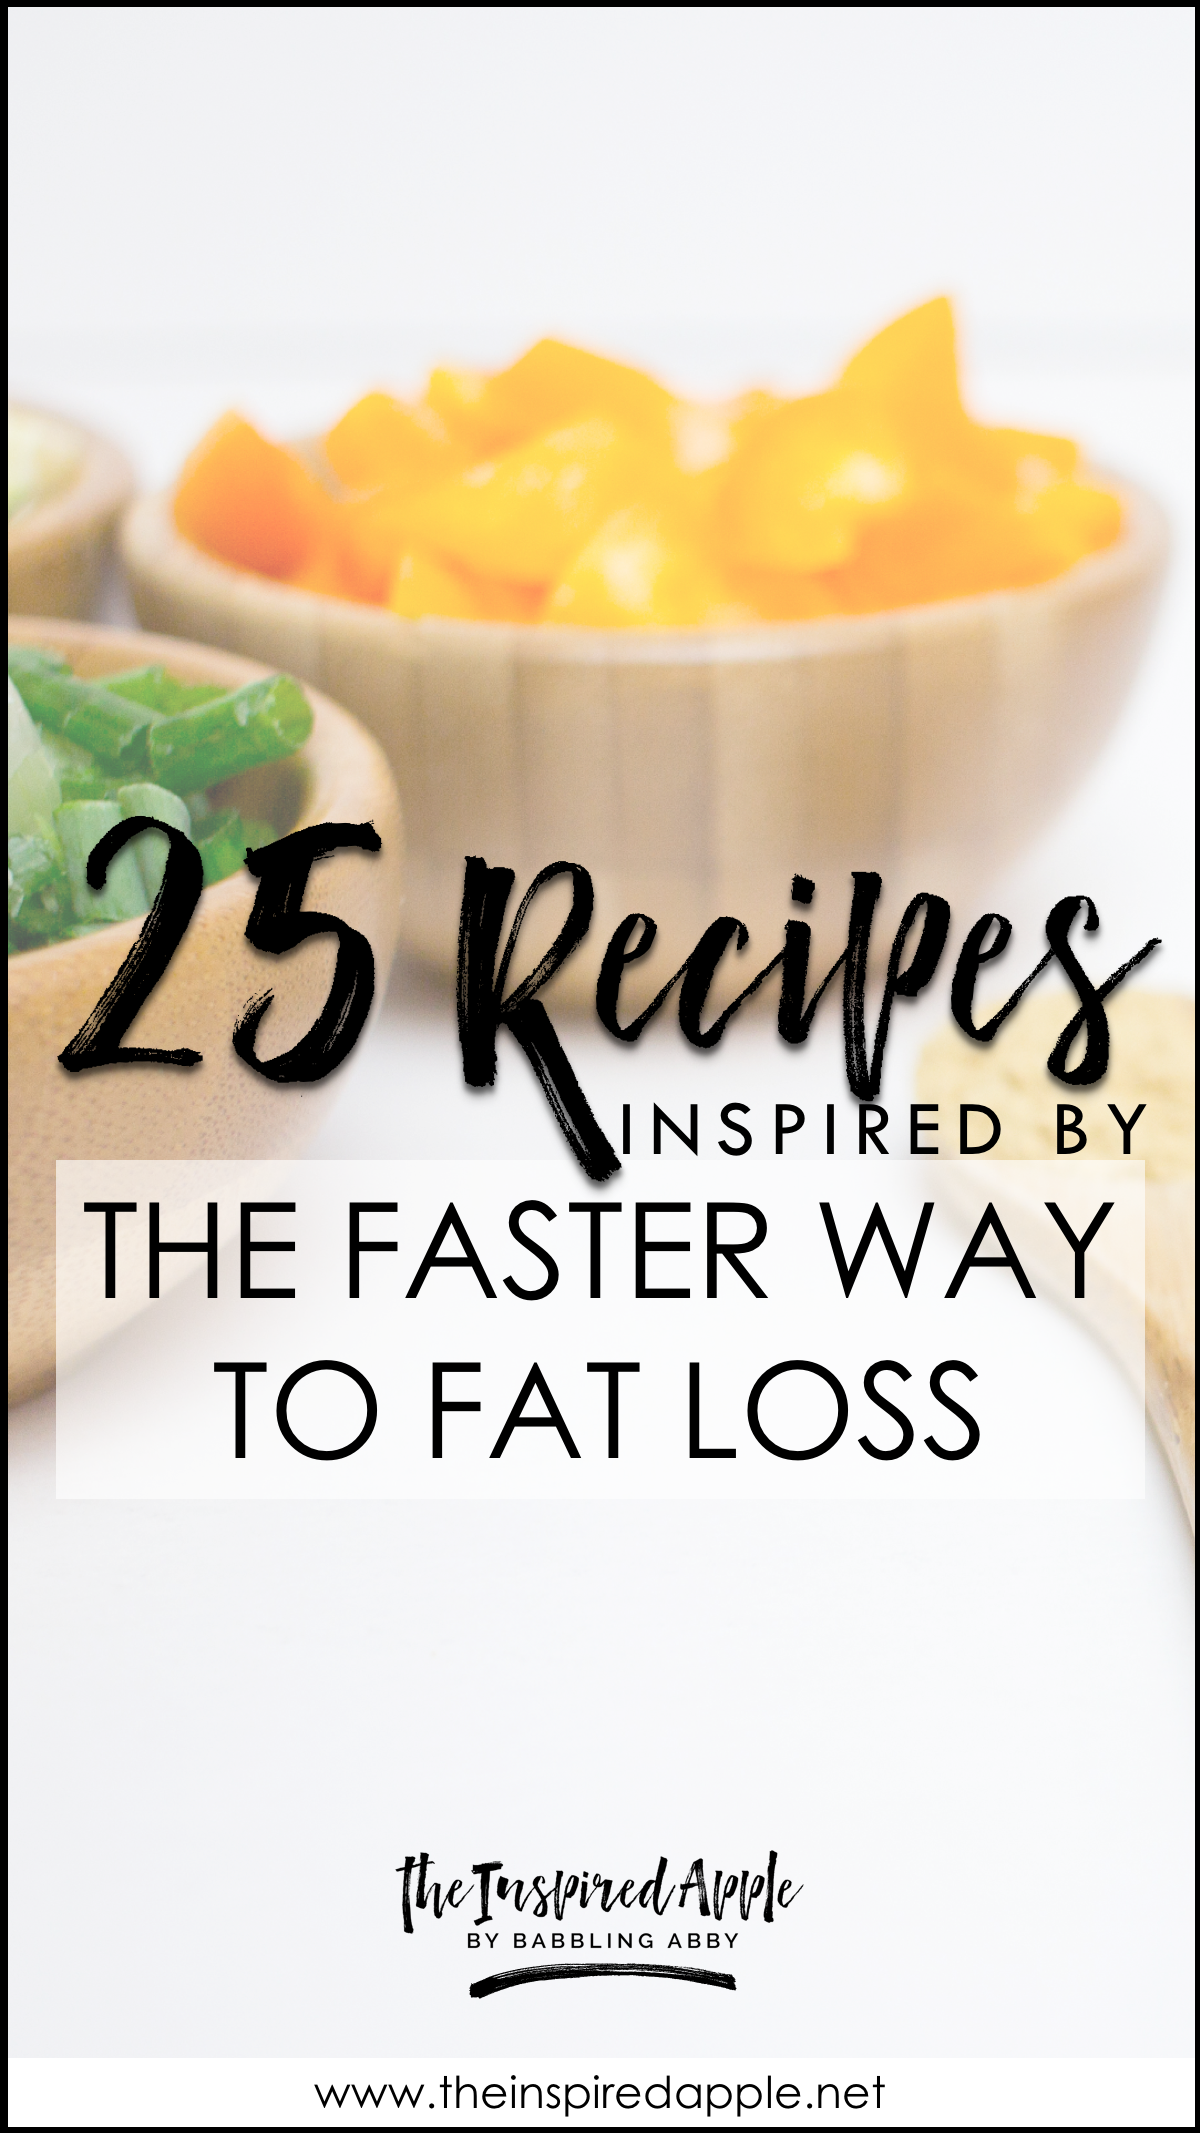 Are you looking for easy and yummy recipes to help you meal plan during your round of Faster Way to Fat Loss? Well, look no further! Babbling Abby has you covered with 25 simple to prepare, tasty, and HEALTHY recipes that will keep your macros on point! Grab this FREE printable that includes every tried-and-true recipe Abby uses in her day to day life. You're going to love them and your family and kids will, too! #FWTFL #healthy #nutritious #fitness #mealprep #yummy #food #tasty #foodblog #easy #recipes #quickrecipes #easyrecipes #familymeals